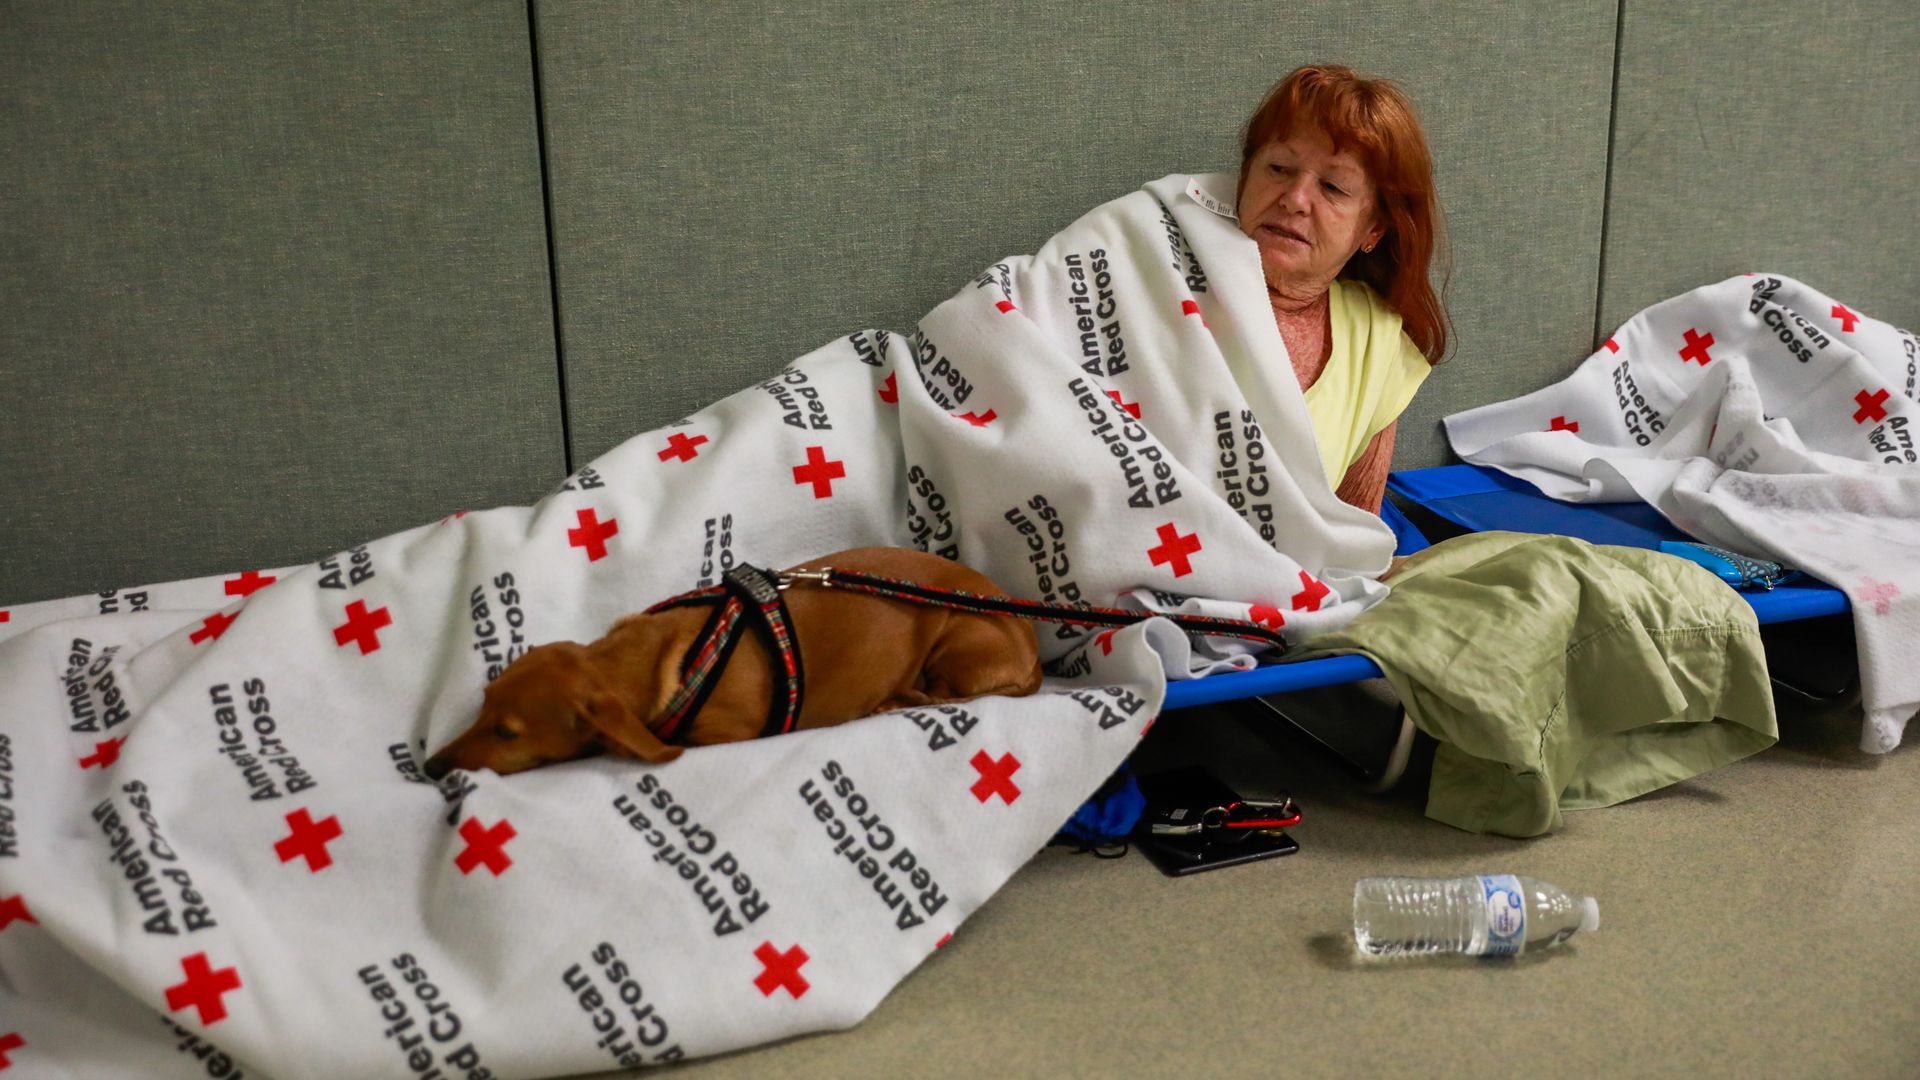 A person and a pup evacuated from a wildfire near Vacaville, California, taking refuge at a Red Cross shelter.